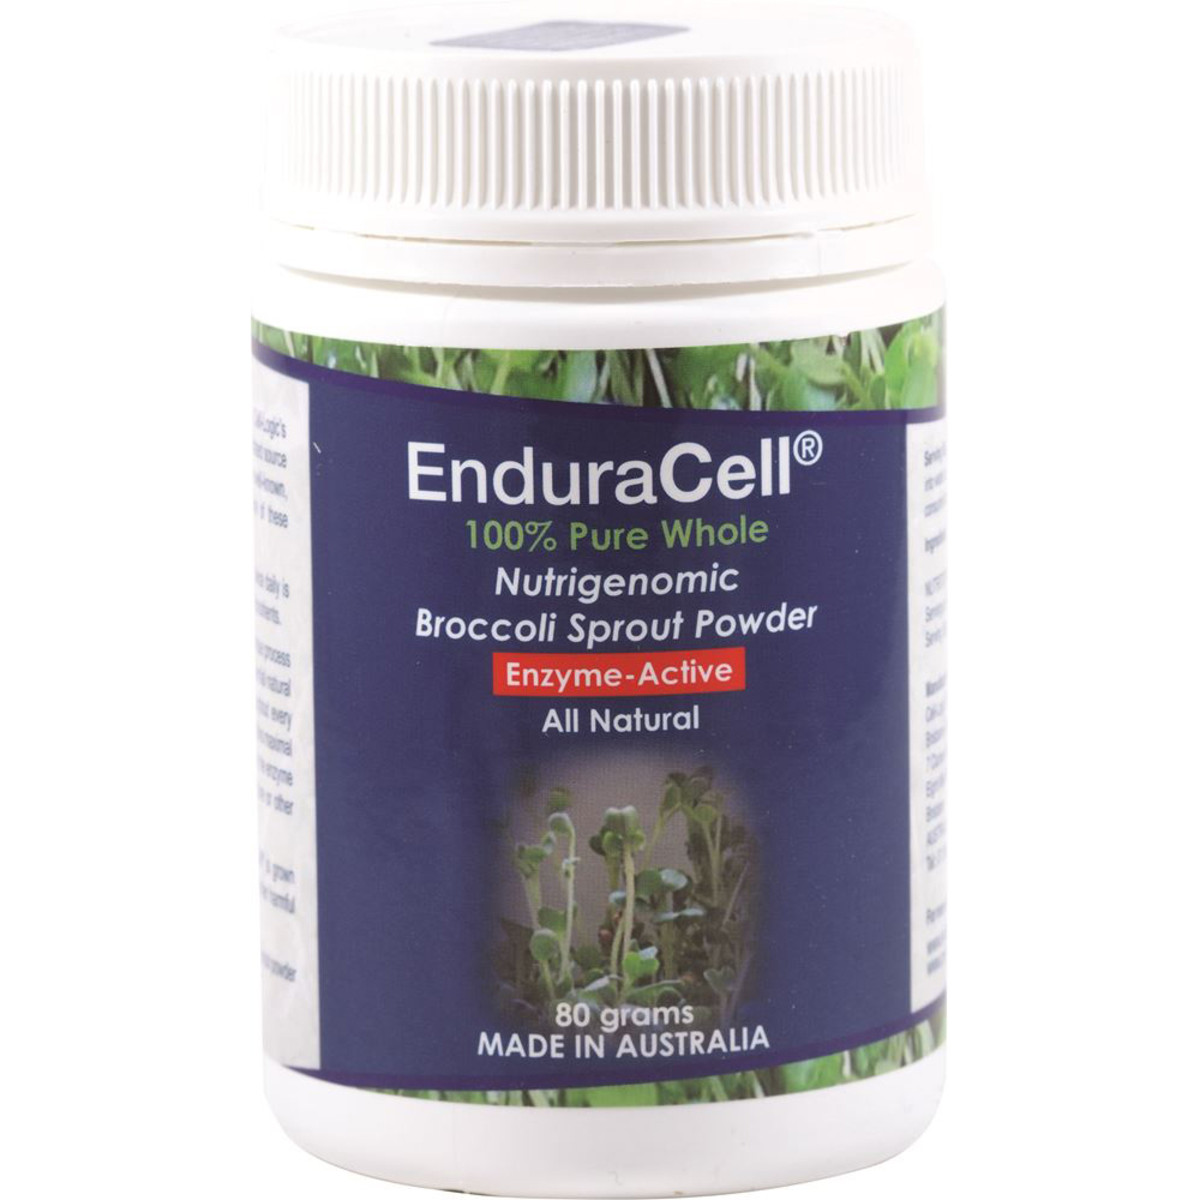 CELL LOGIC - EnduraCell Broccoli Sprout Powder